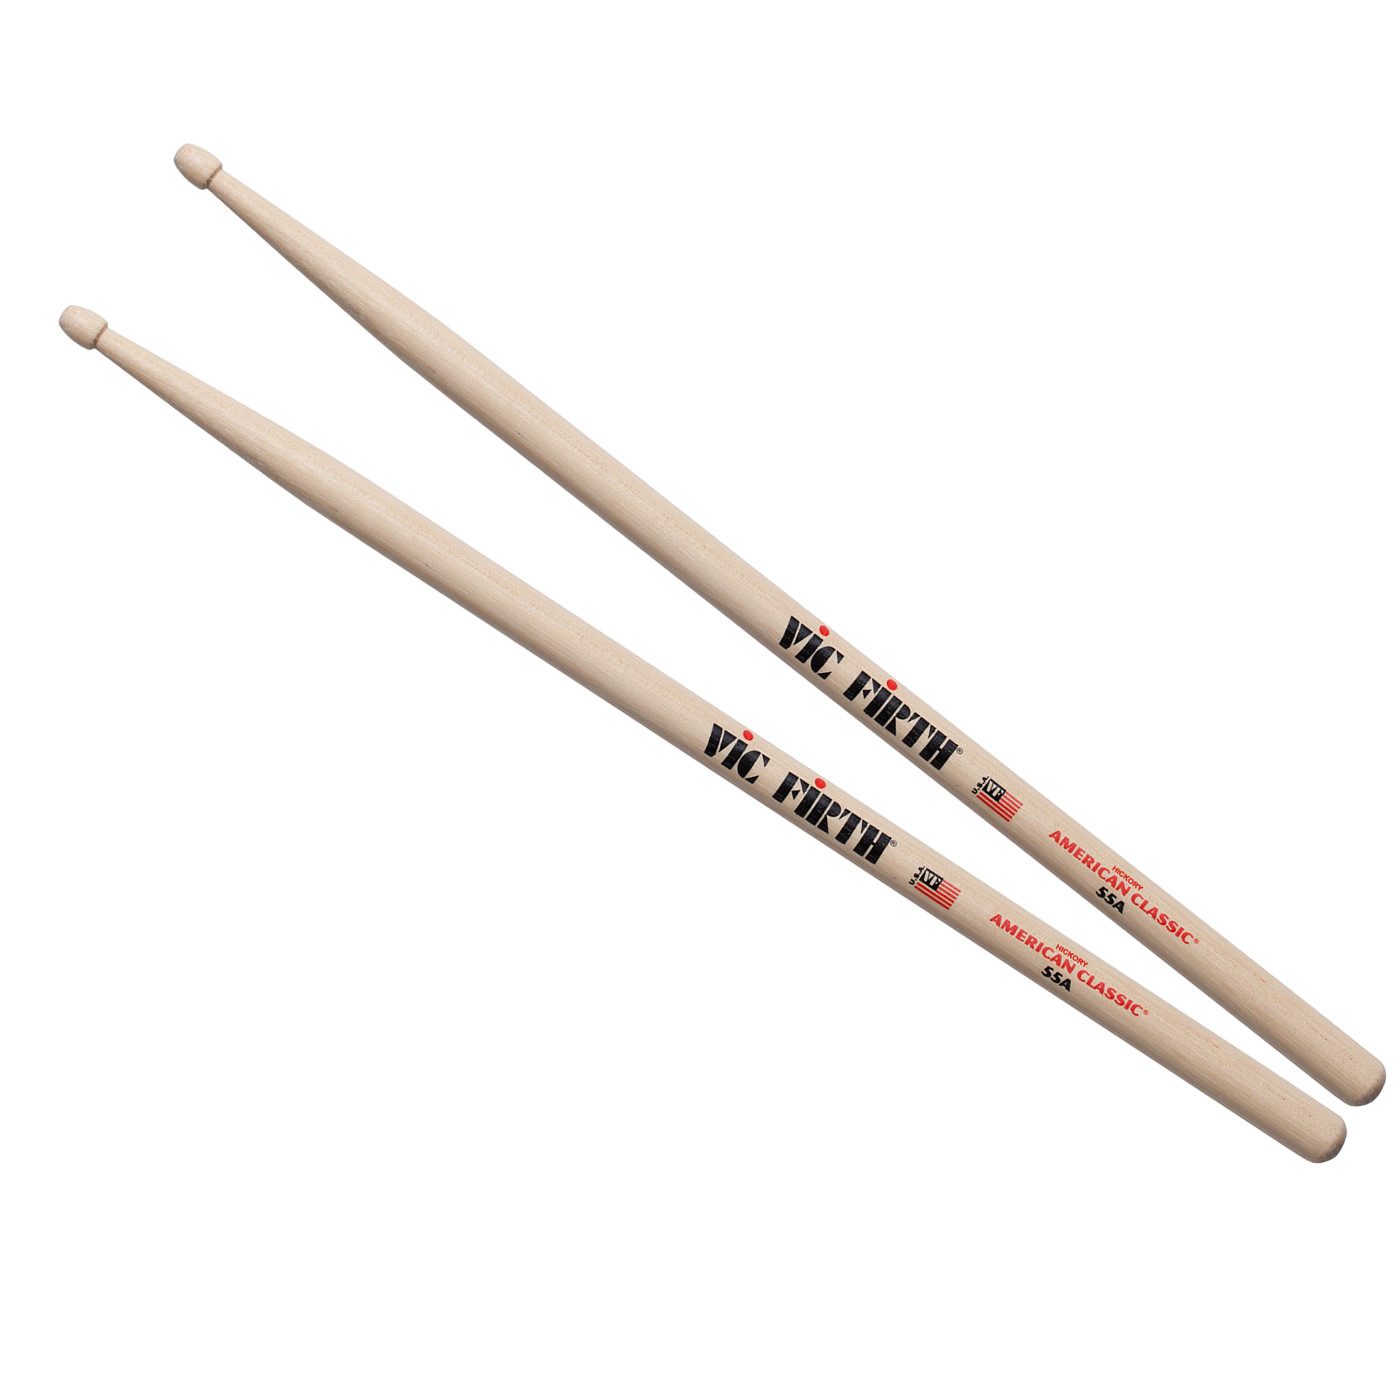 VIC FIRTH 55A - AMERICAN CLASSIC HICKORY